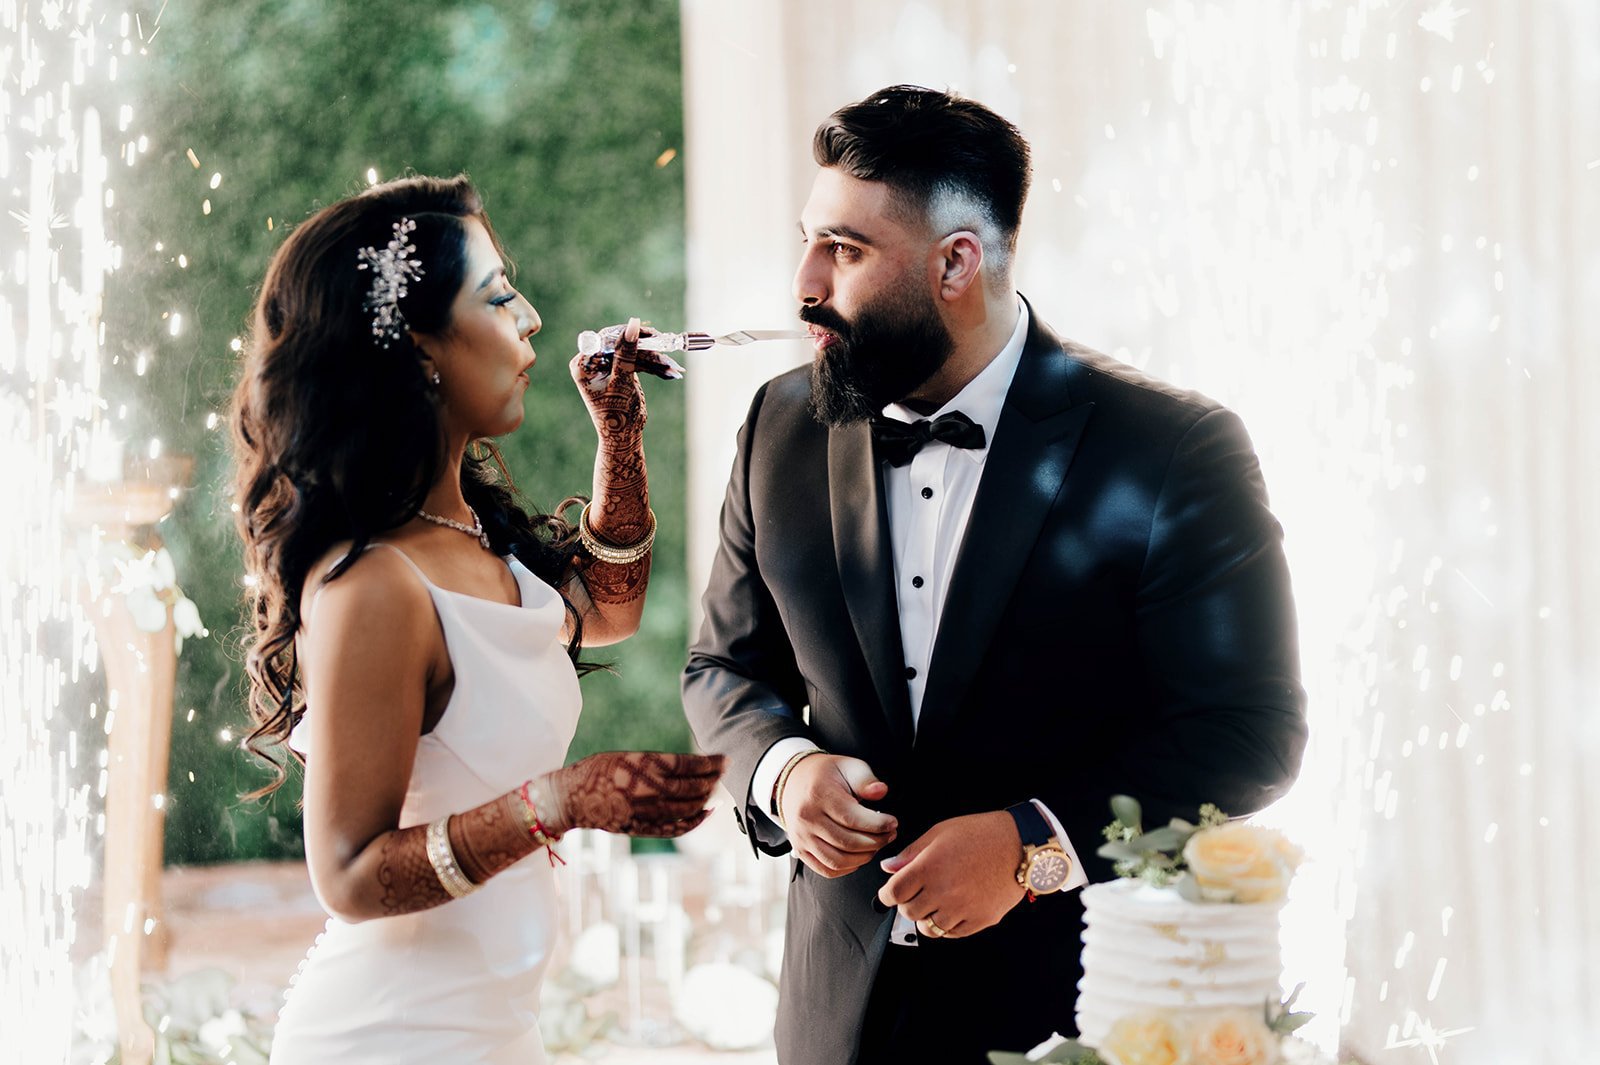 An indian bride feeds her groom some wedding cake.